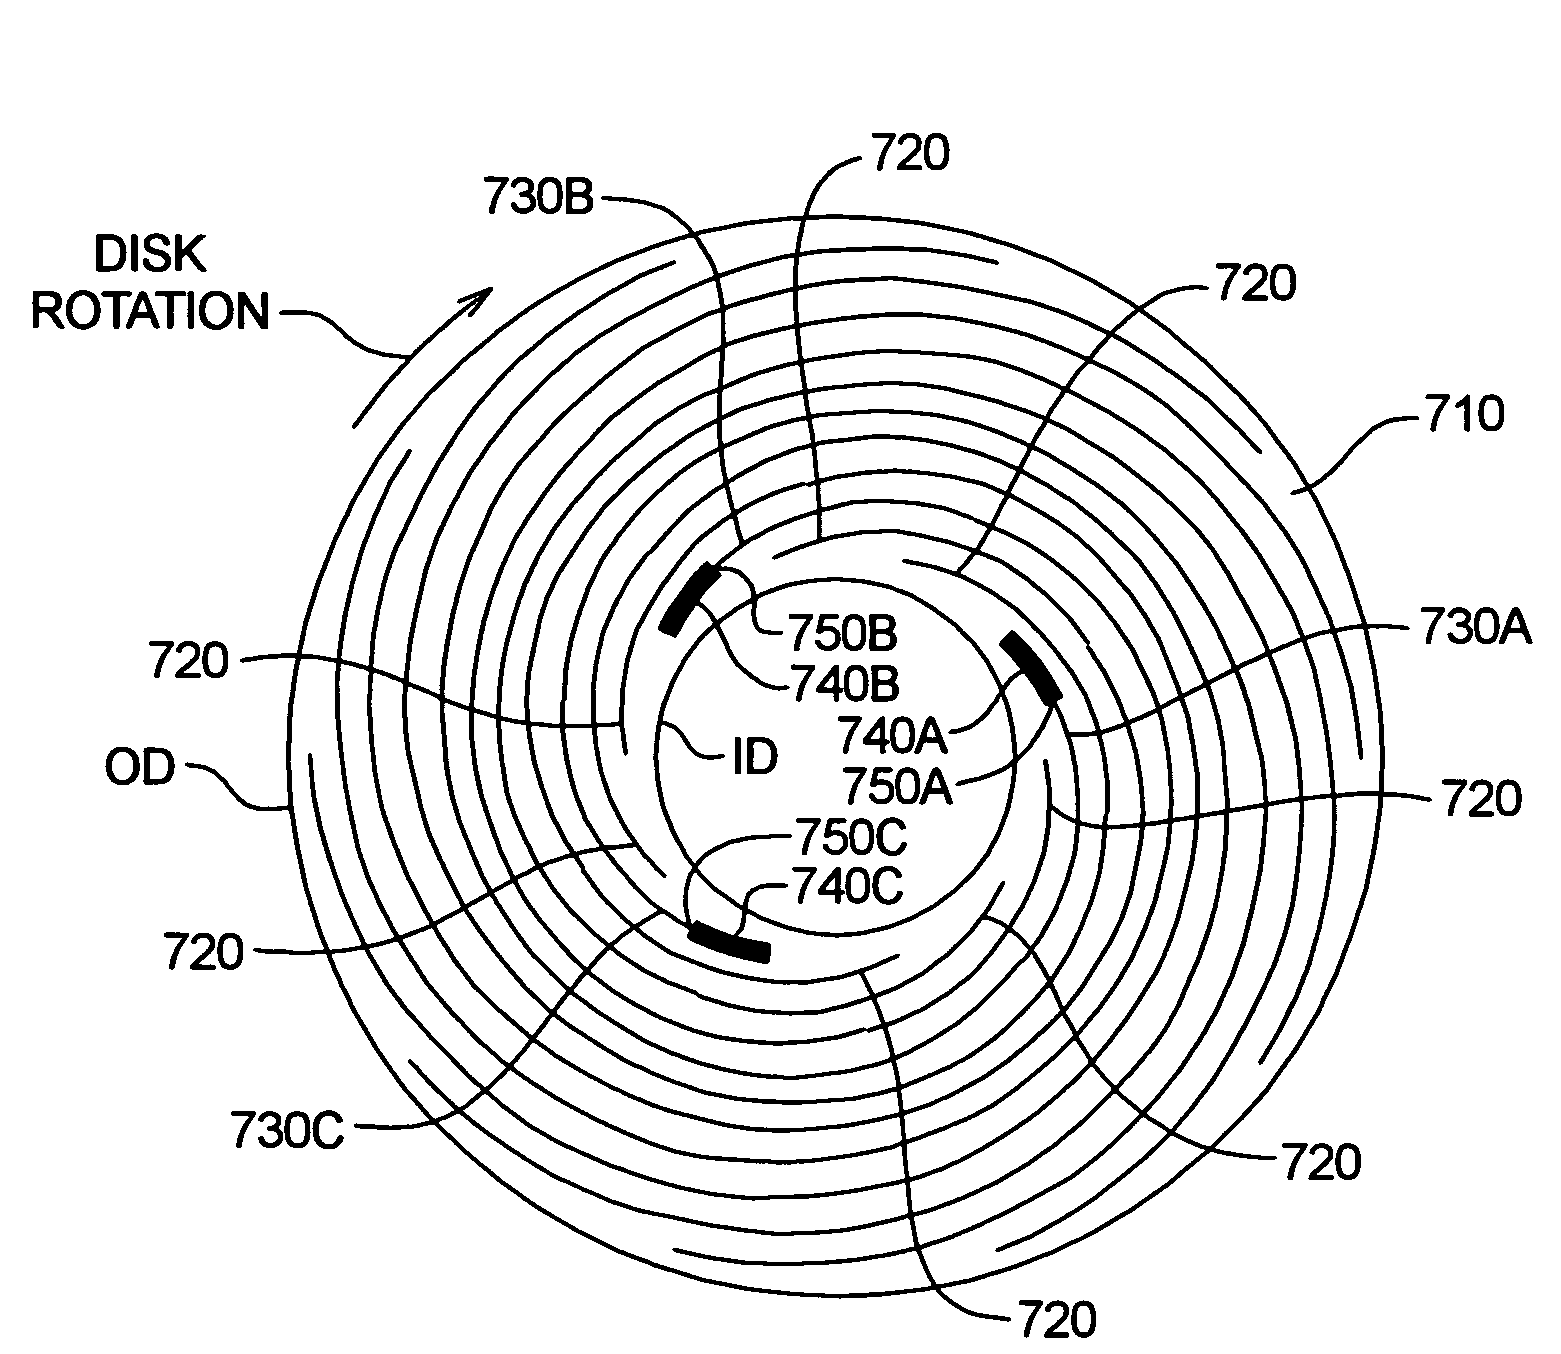 Spiral servo patterns with absolute reference point